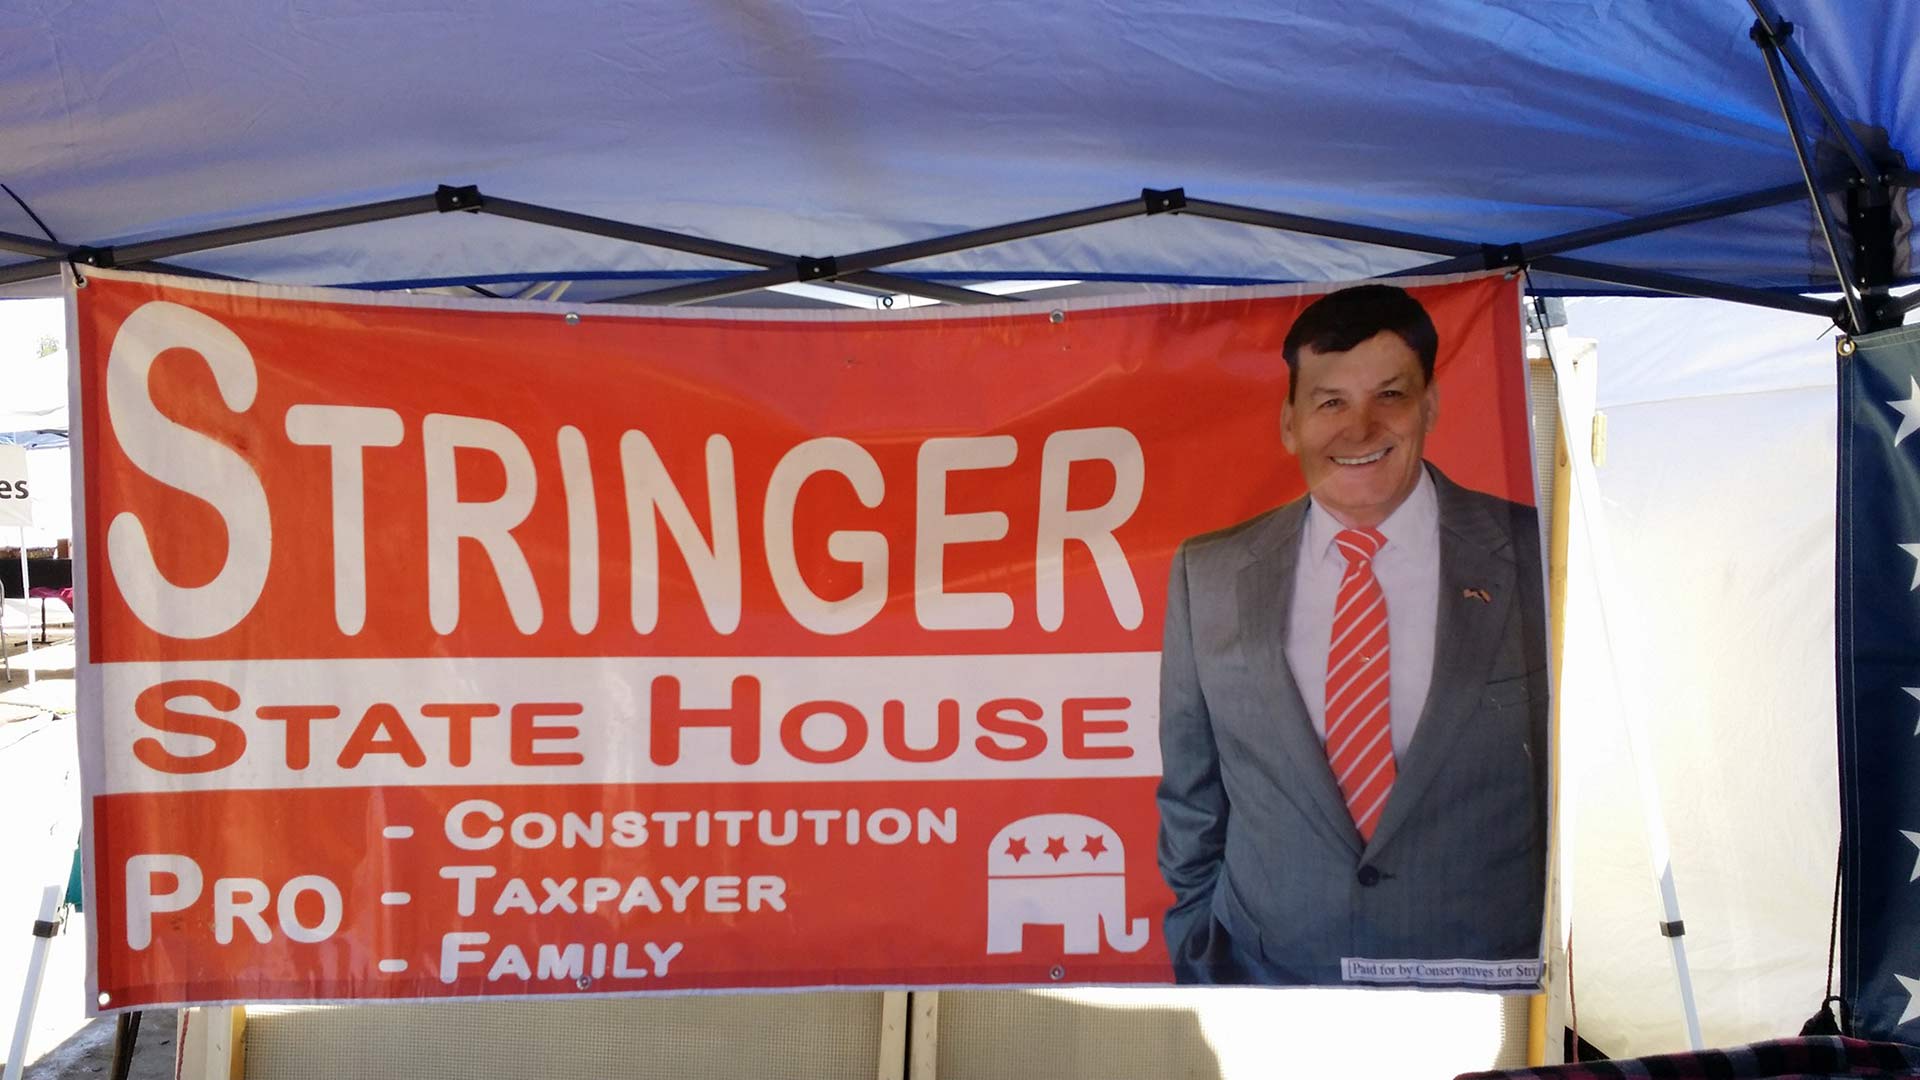 A photo of a campaign banner for Arizona Rep. David Stringer, R-Prescott, posted on Stringer's Facebook page.